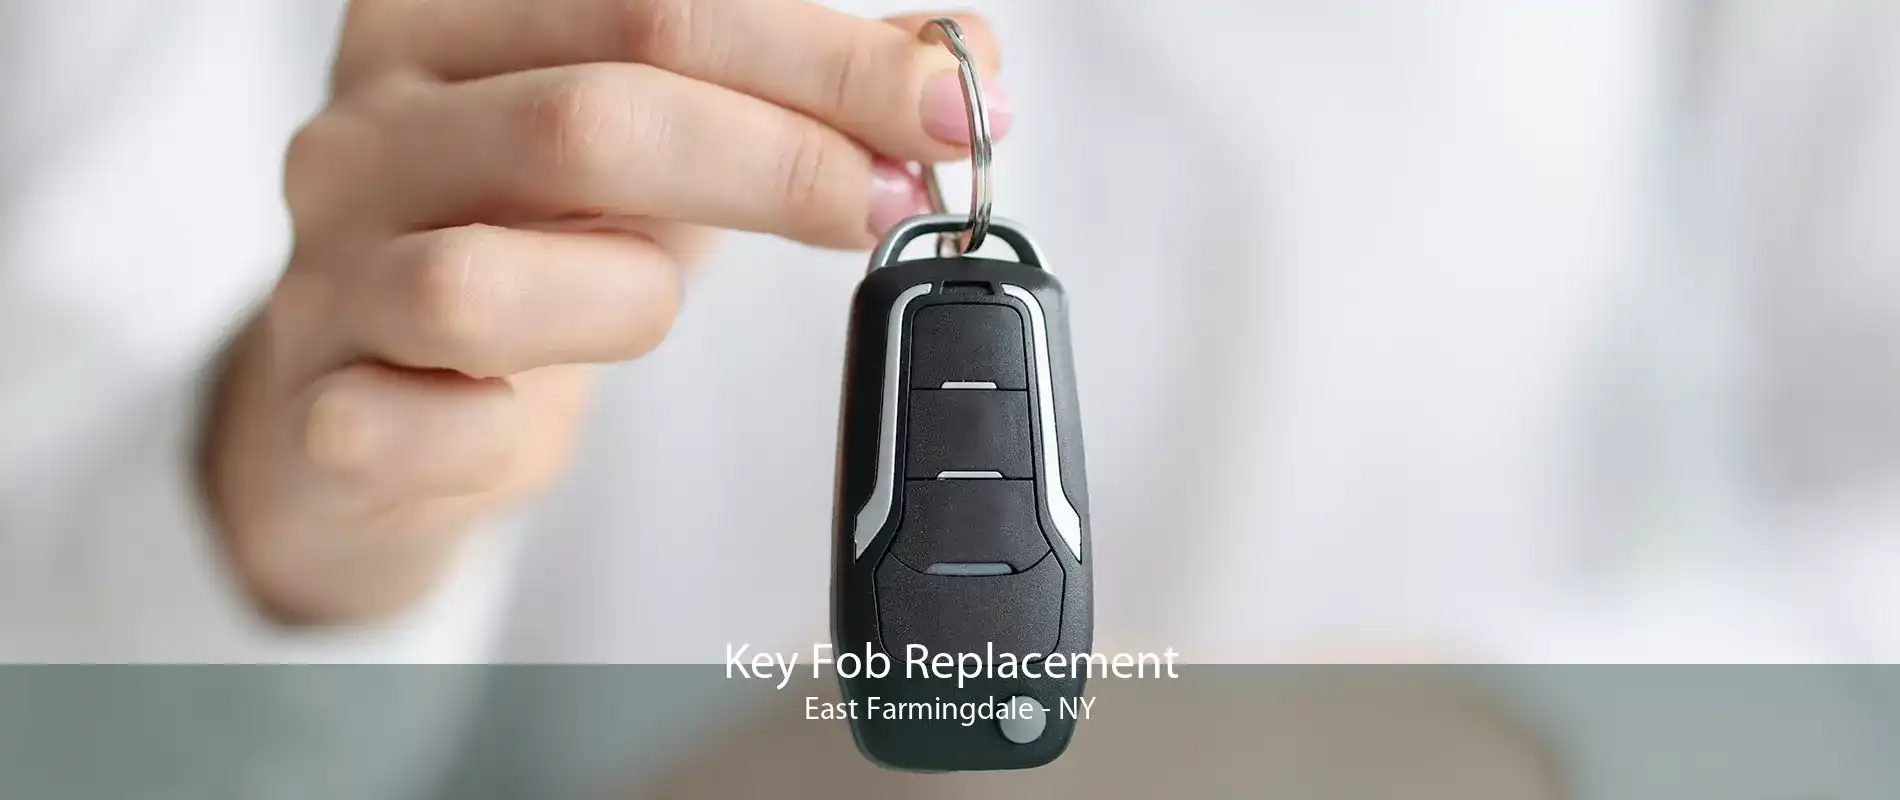 Key Fob Replacement East Farmingdale - NY